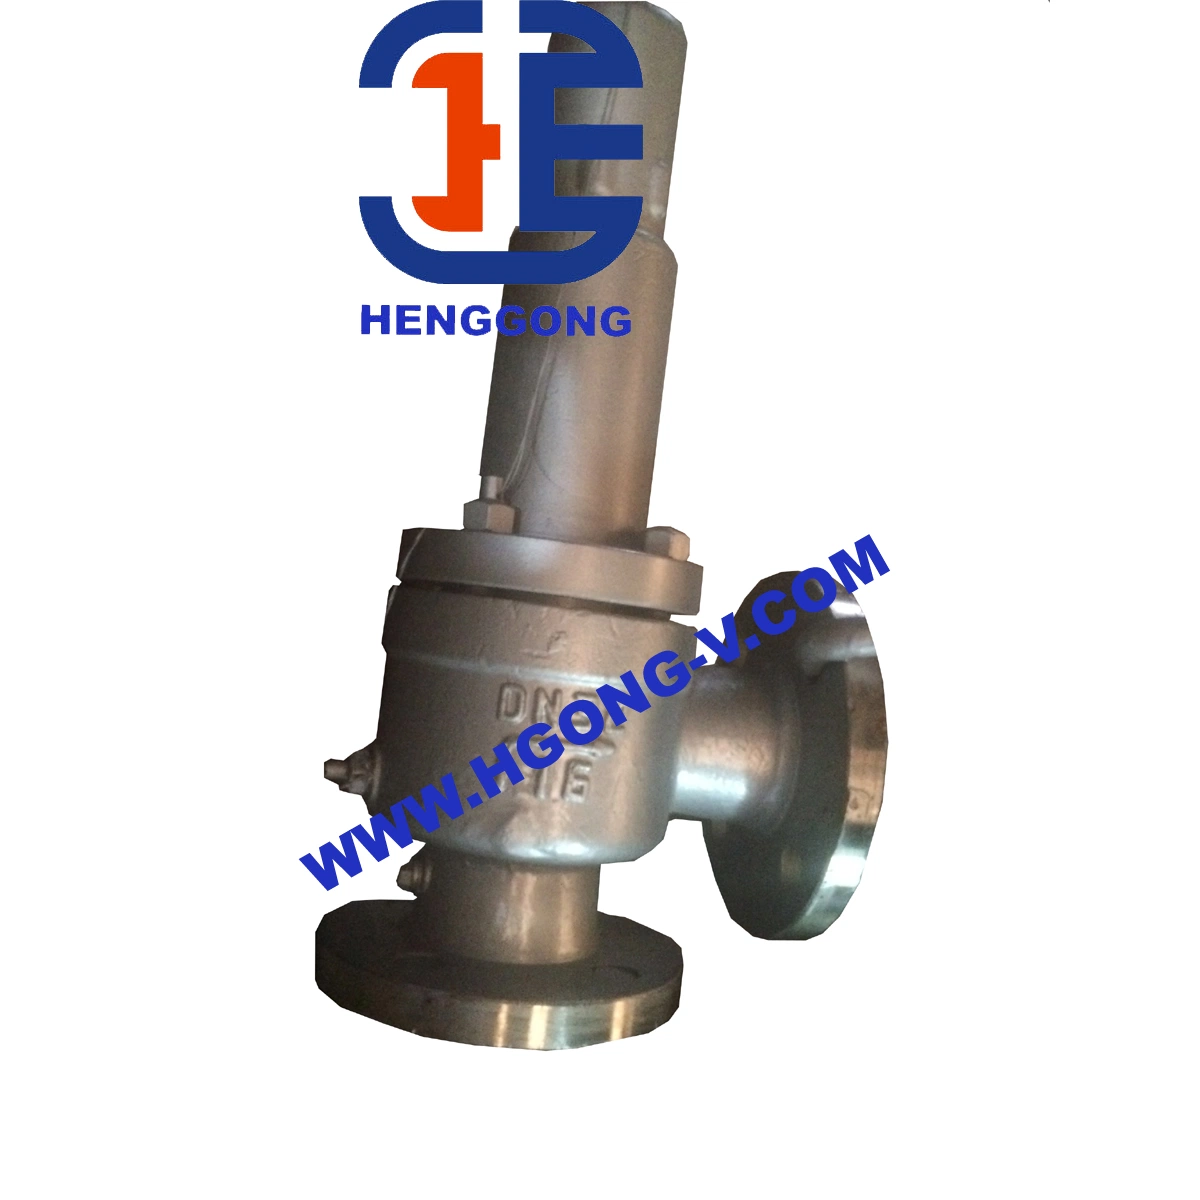 API DIN JIS Wcb Carbon Steel Spring Fall Lift with Radiator Hf Oil Refining Pressure Relief Safety Valve for